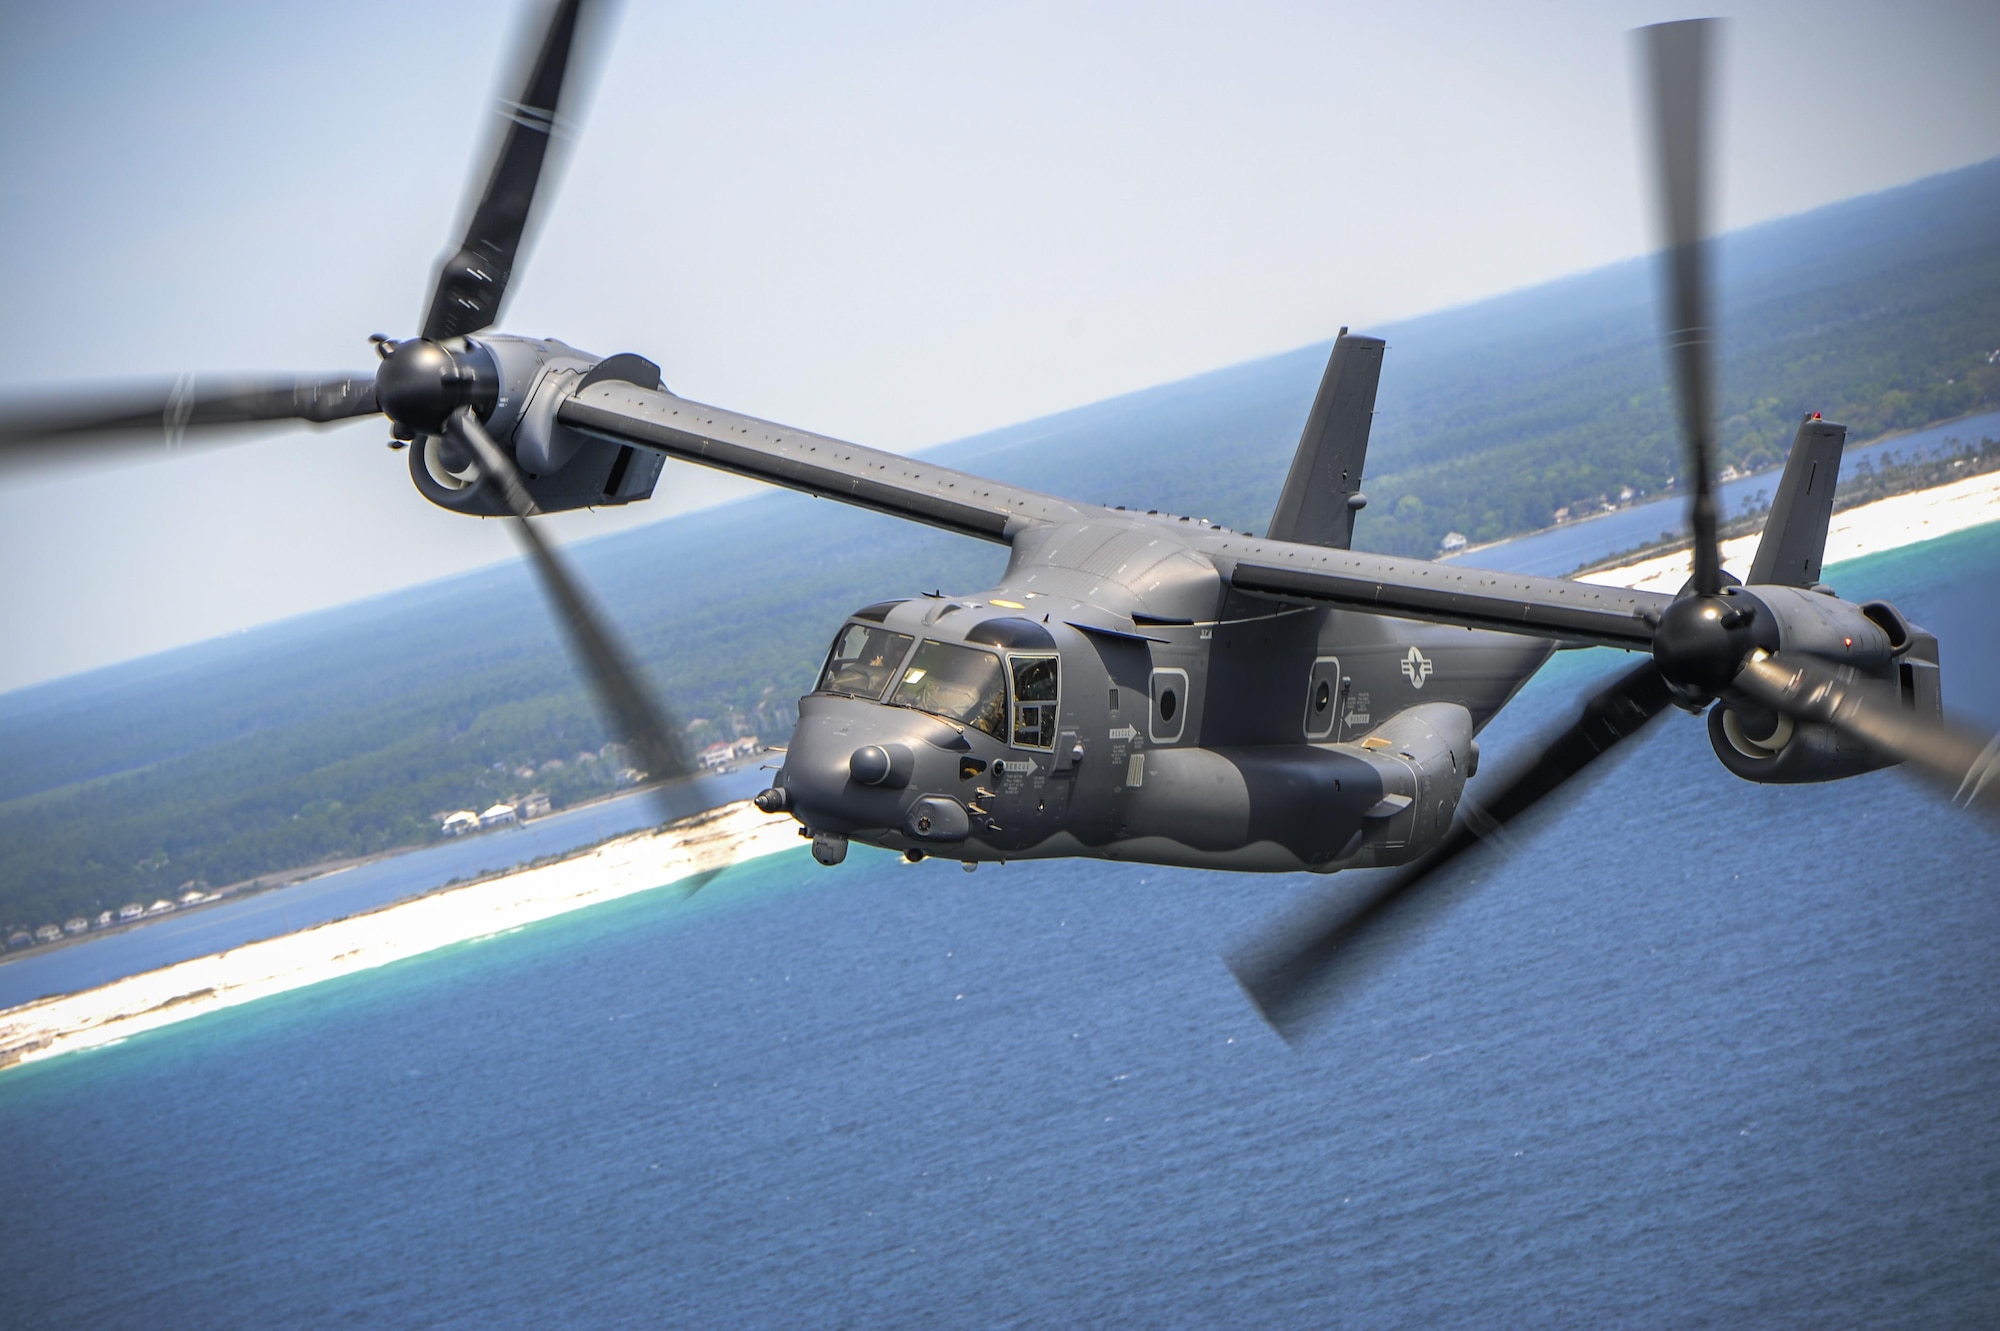 The CV-22 Osprey is a tilt-rotor aircraft that combines the vertical takeoff, hover and vertical landing qualities of a helicopter with the long-range, fuel efficiency and speed characteristics of a turboprop aircraft. Its mission is to conduct long-range infiltration, ex-filtration and resupply missions for special operations forces. (U.S. Air Force photo)
